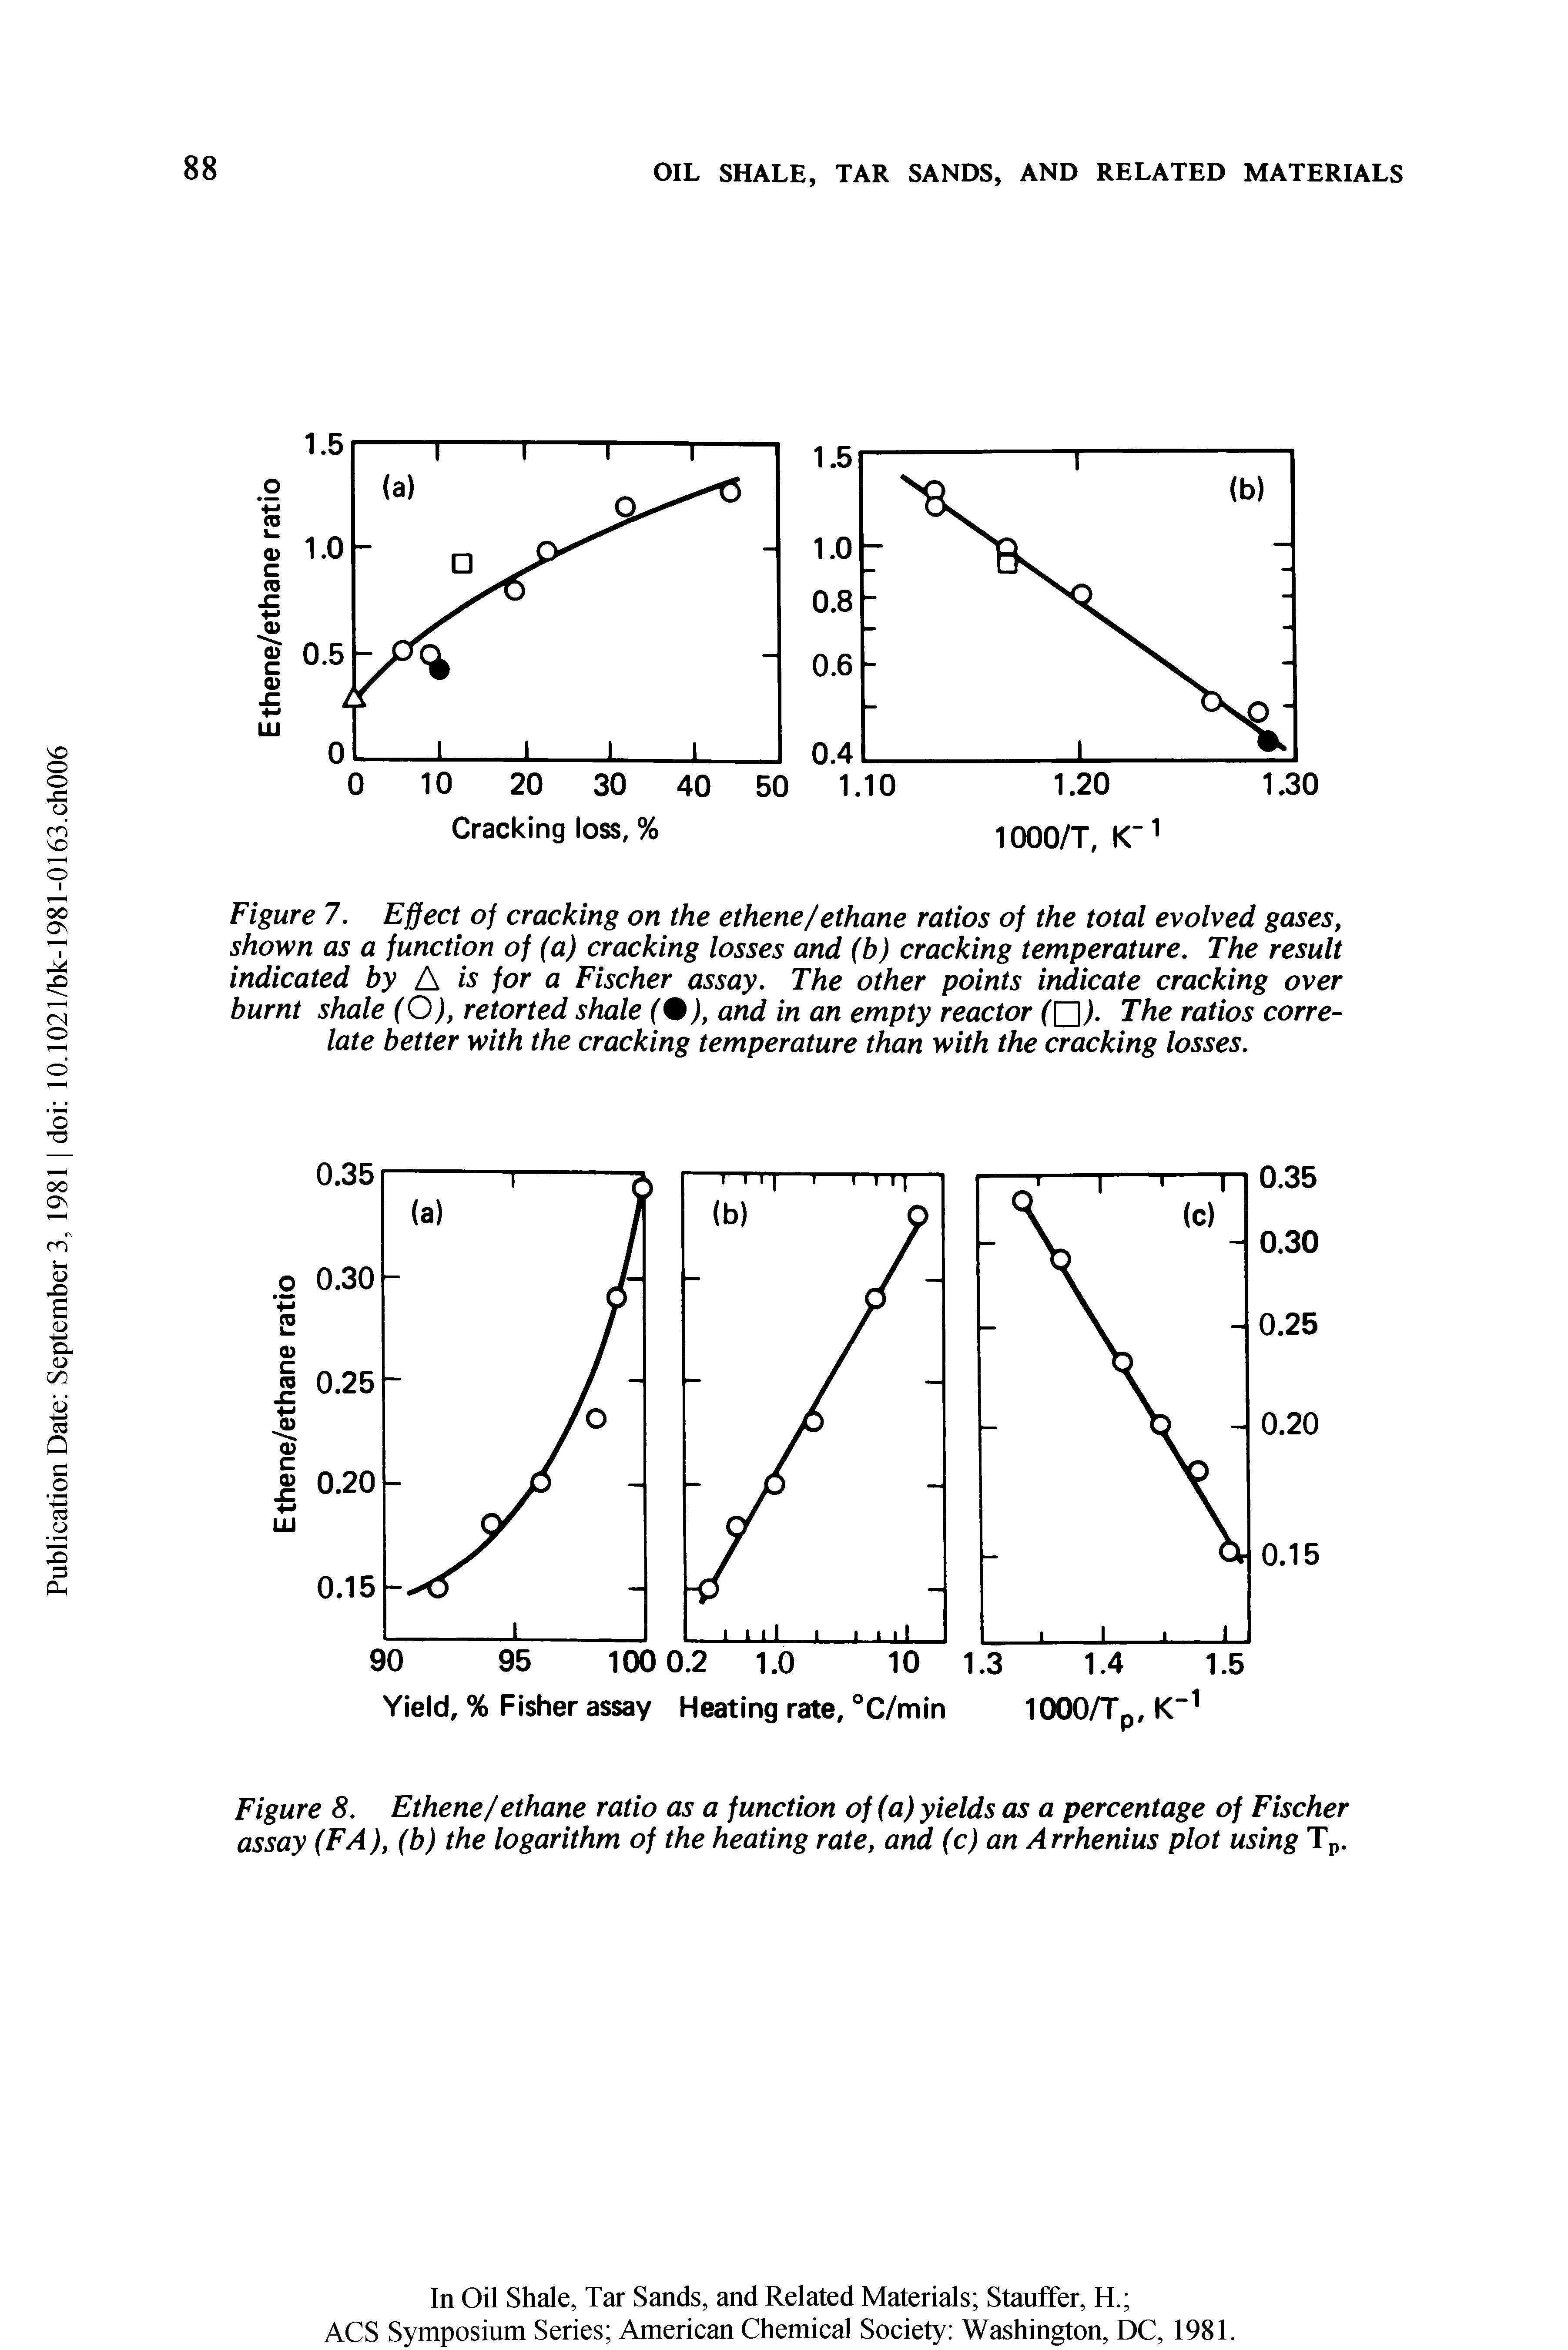 Figure 7. Effect of cracking on the ethene/ethane ratios of the total evolved gases, shown as a function of (a) cracking losses and (b) cracking temperature. The result indicated by A is for a Fischer assay. The other points indicate cracking over burnt shale (O), retorted shale (%), and in an empty reactor ([2). The ratios correlate better with the cracking temperature than with the cracking losses.